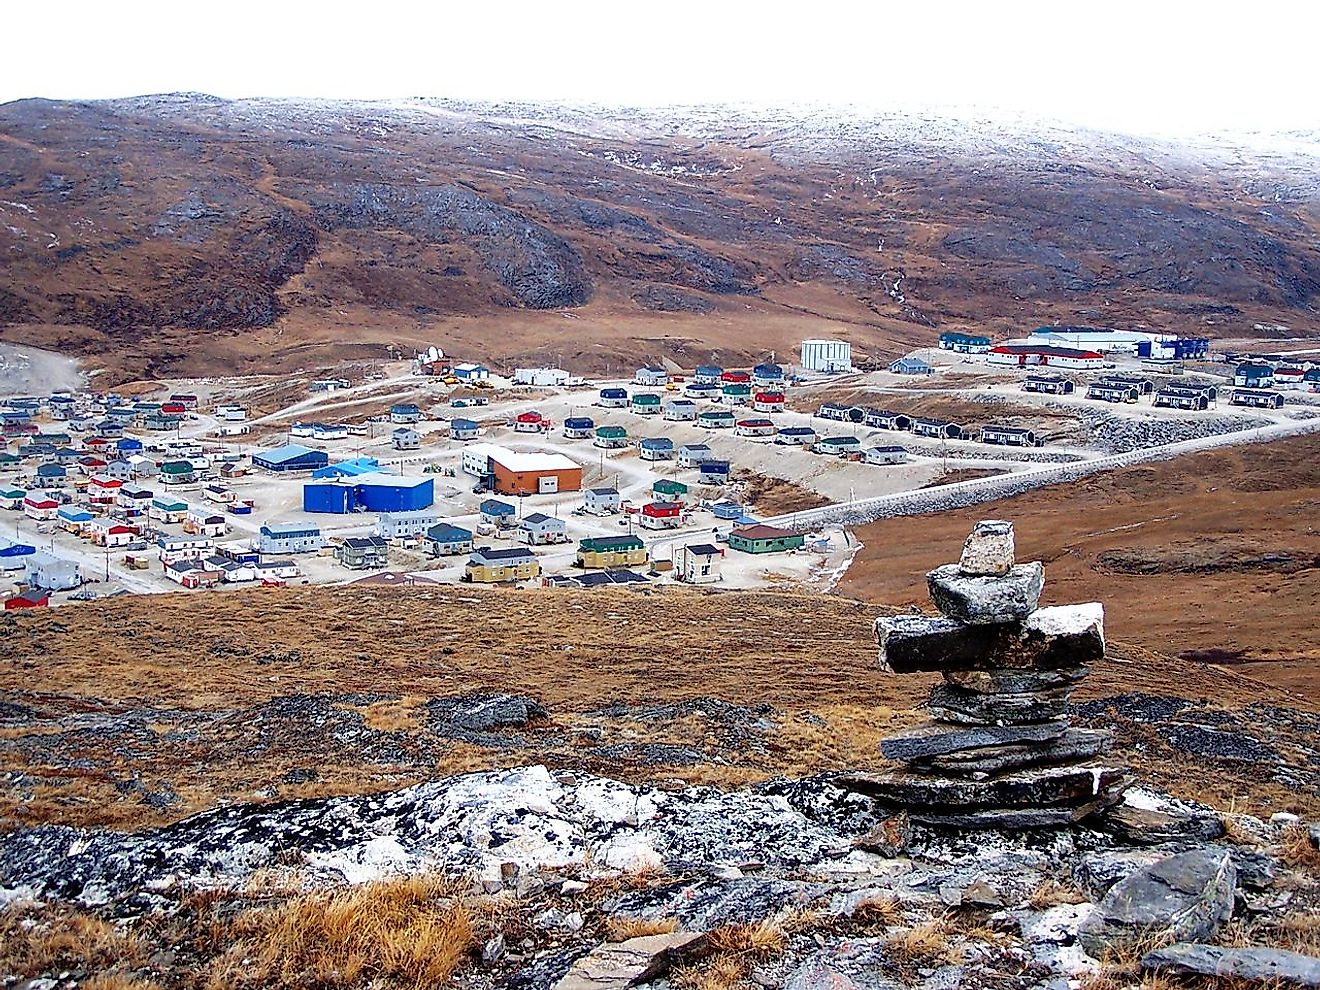 Salluit settlement, the second northernmost Inuit community in Quebec, Canada. Image credit: Louis Carrier/Wikimedia.org